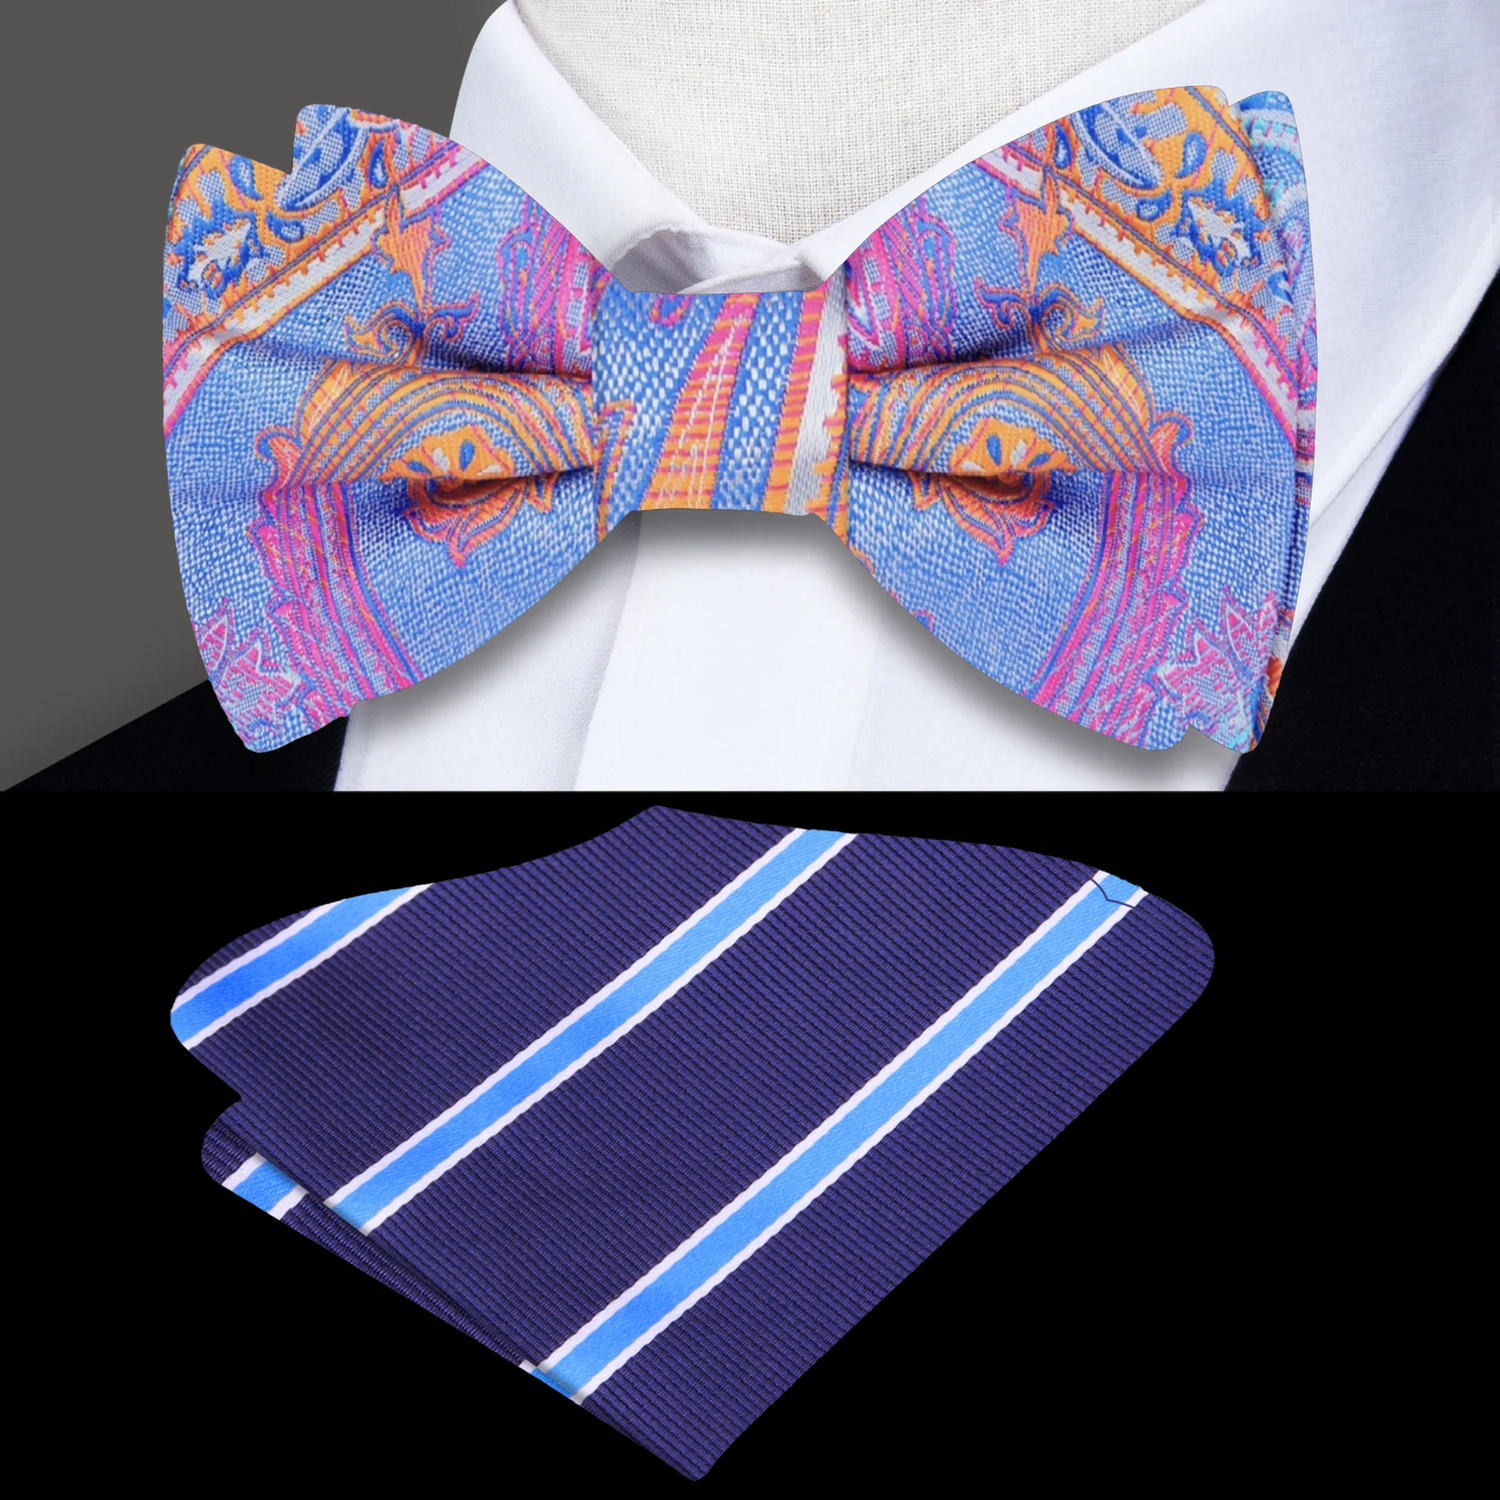 Blue, Pink and Orange Paisley Bow Tie and Accenting Pocket Square